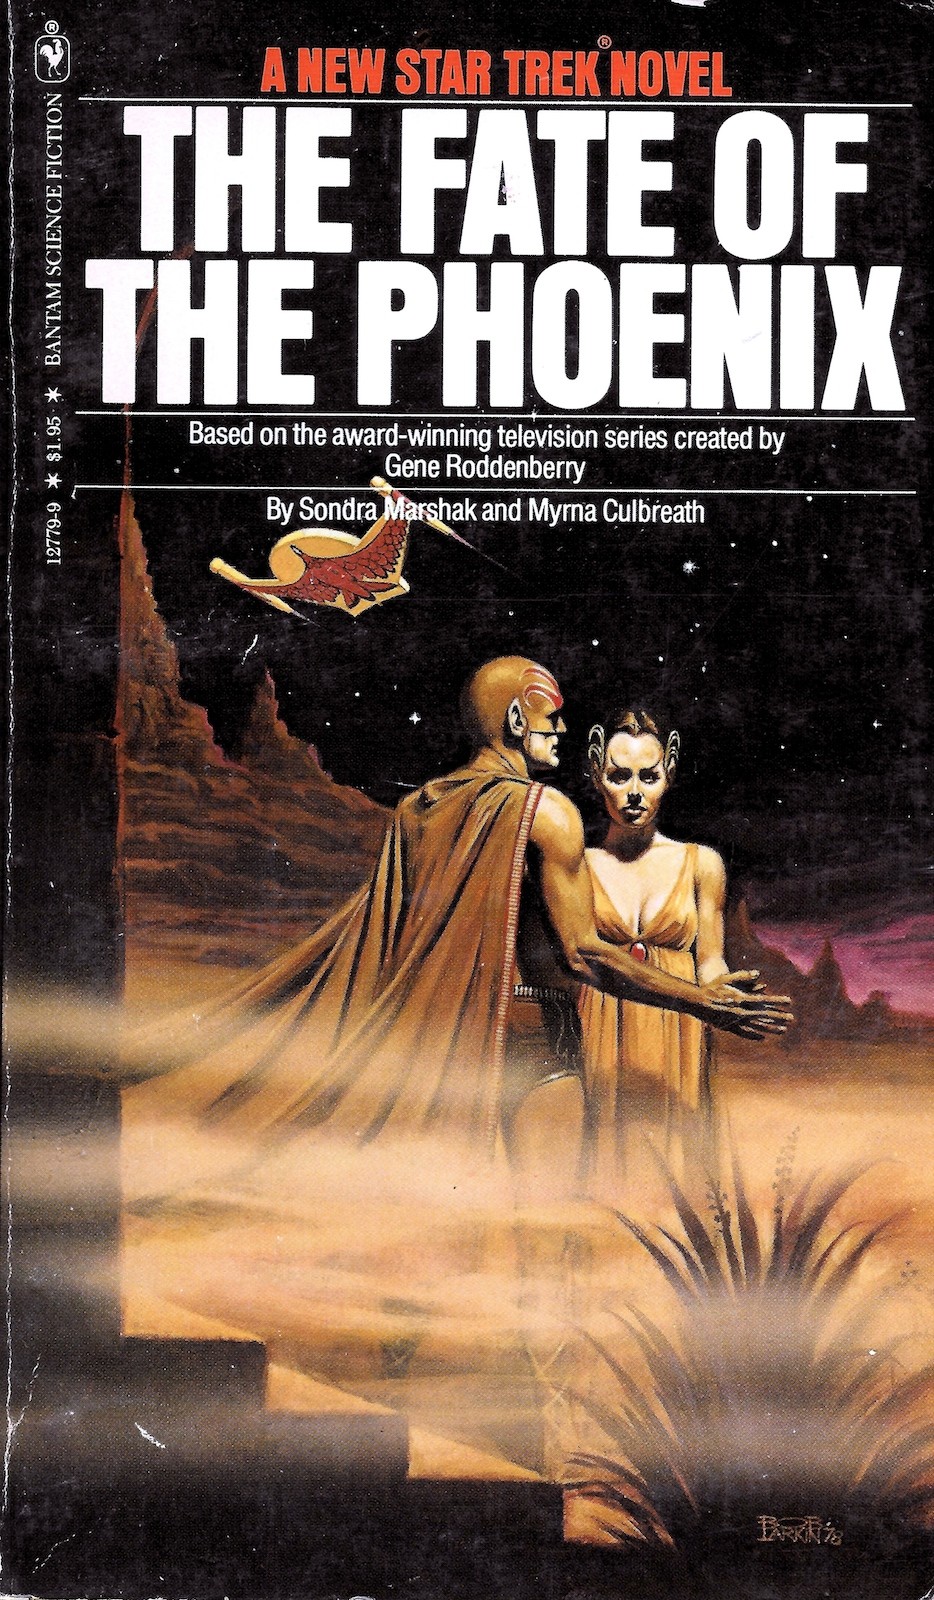 The Fate of the Phoenix (May 1979)